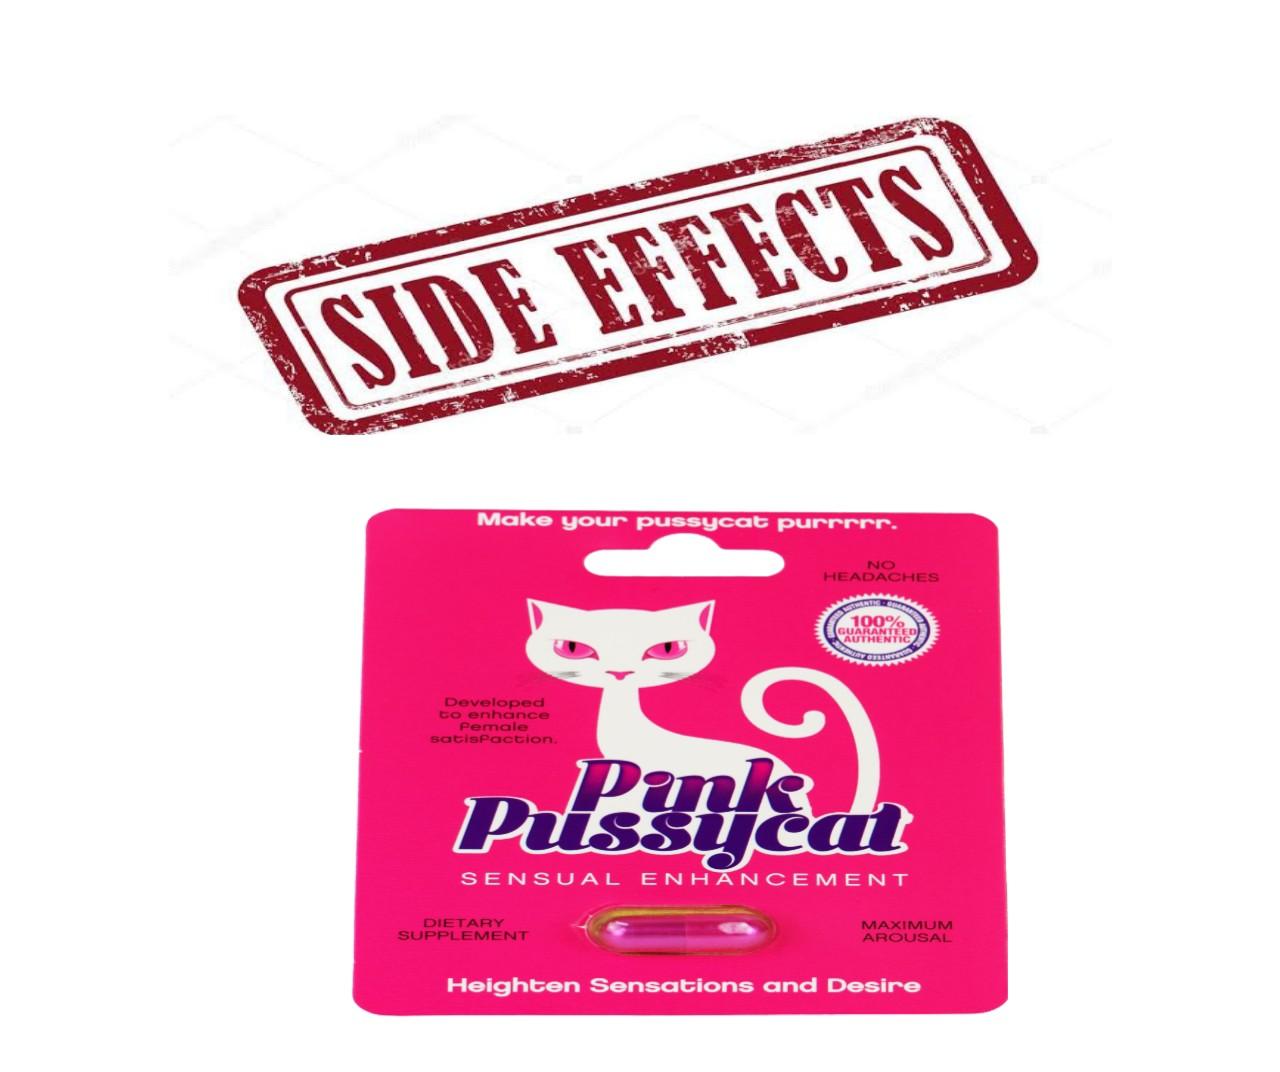 Does Pink Pussycat Sex Pills Have Side Effects? Public Health